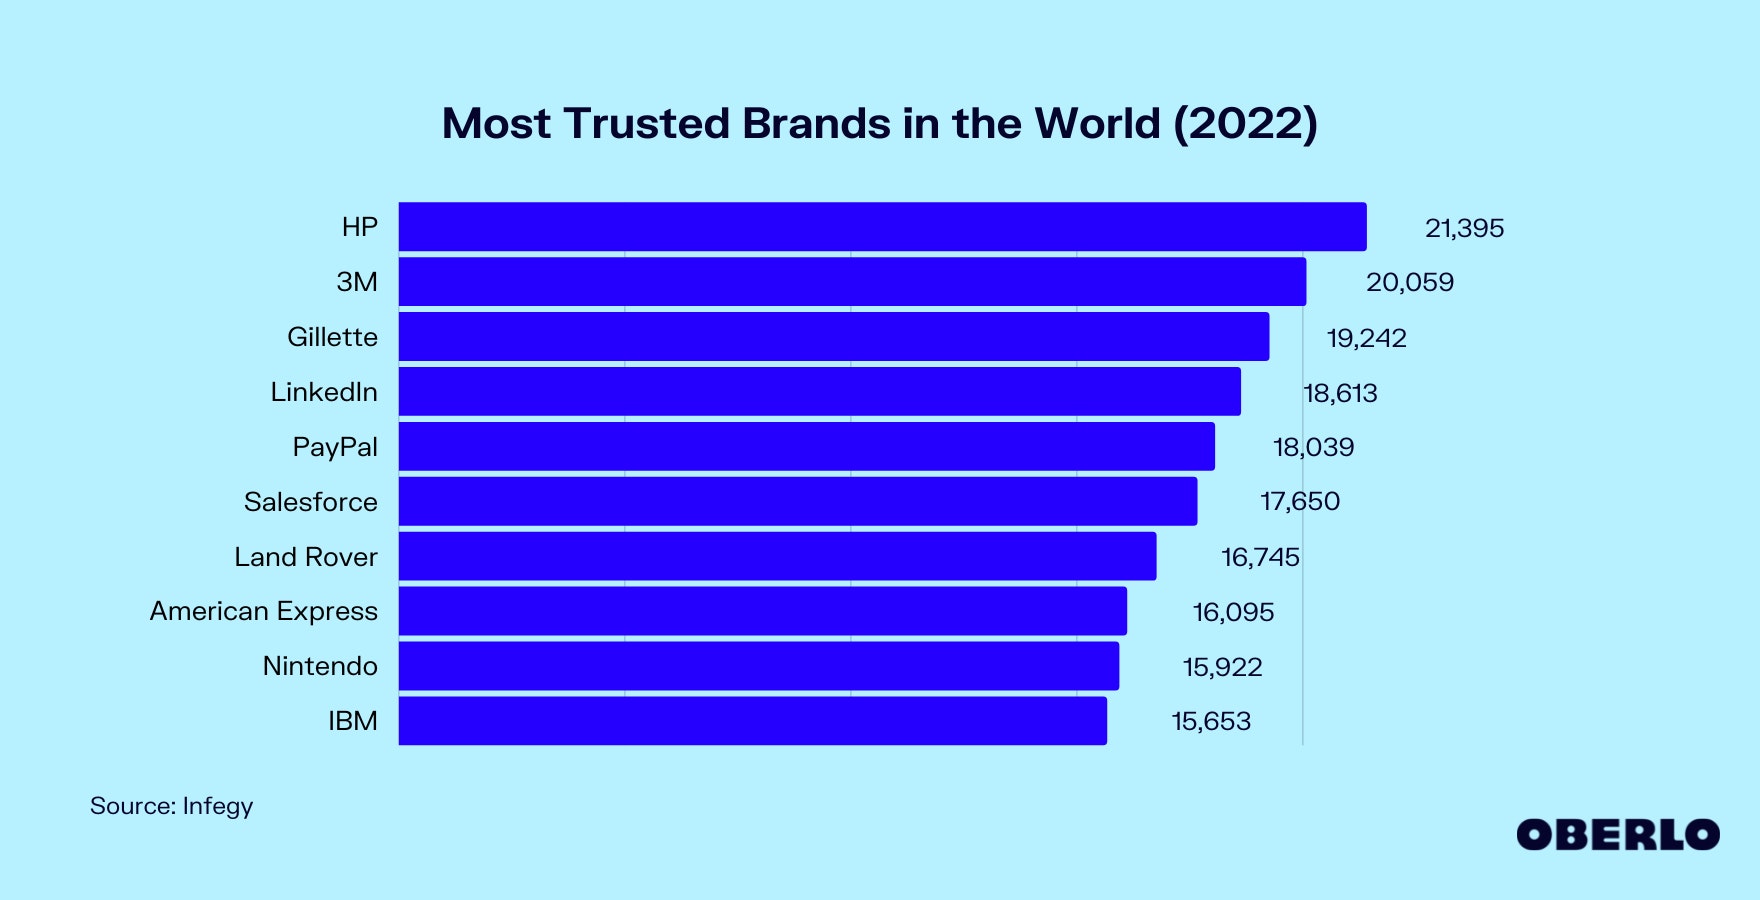 Chart showing the Most Trusted Brands in the World